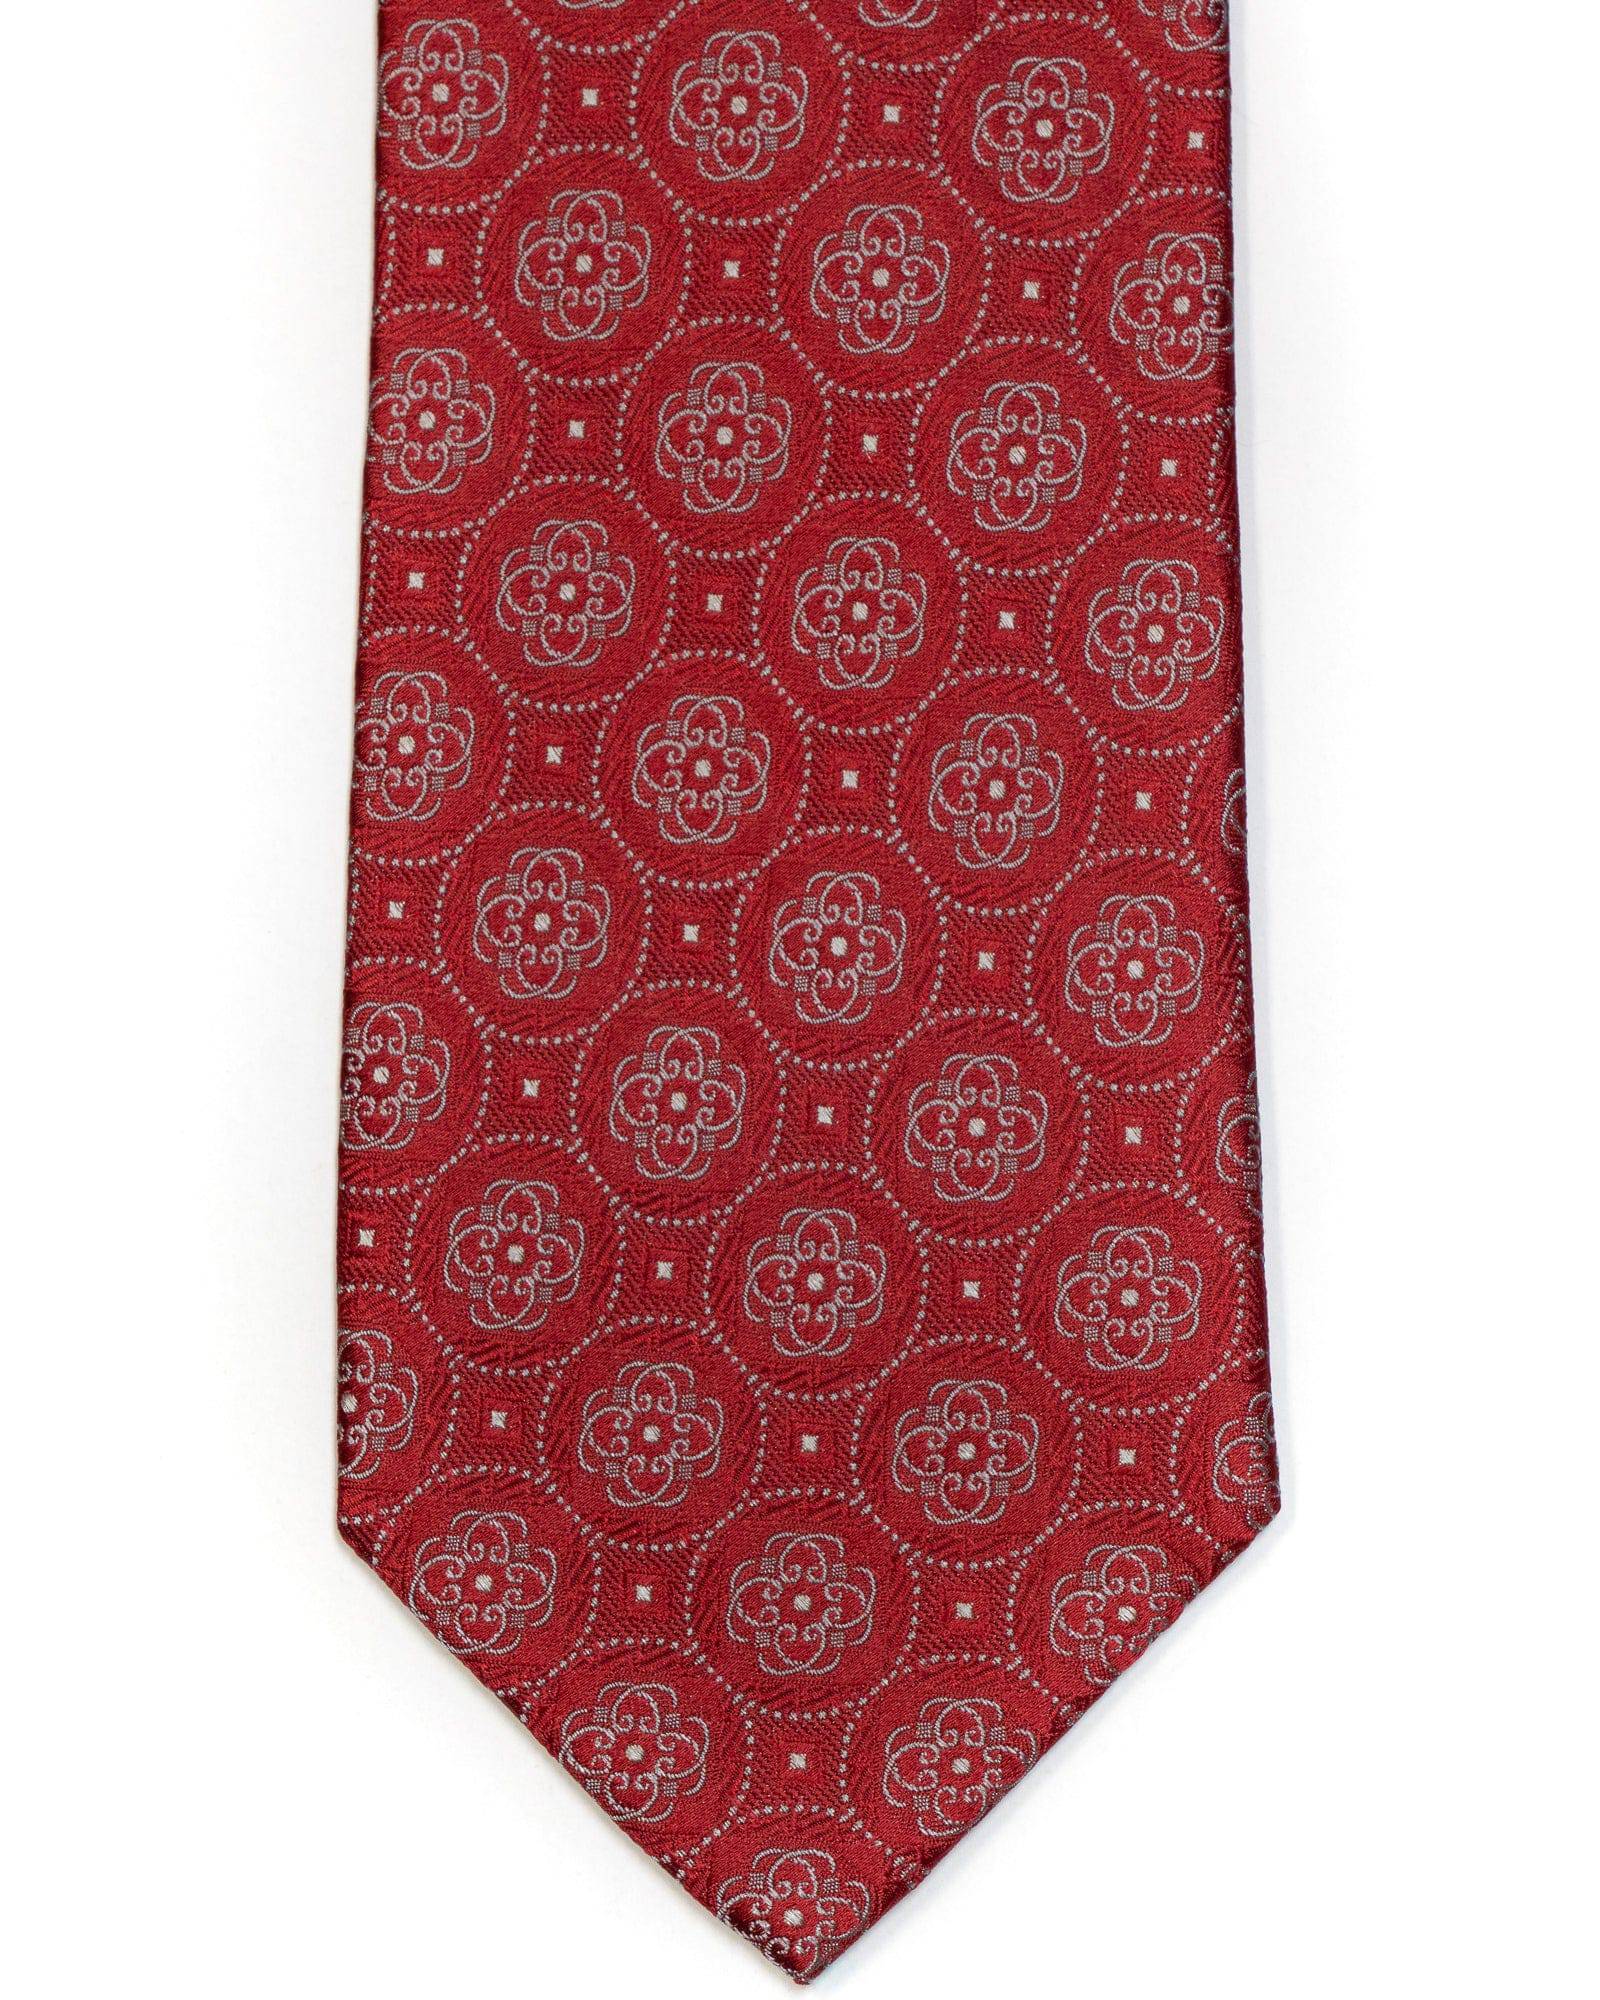 Silk Tie In Deep Red With Blue Medallion Circle Foulard Design - Rainwater's Men's Clothing and Tuxedo Rental